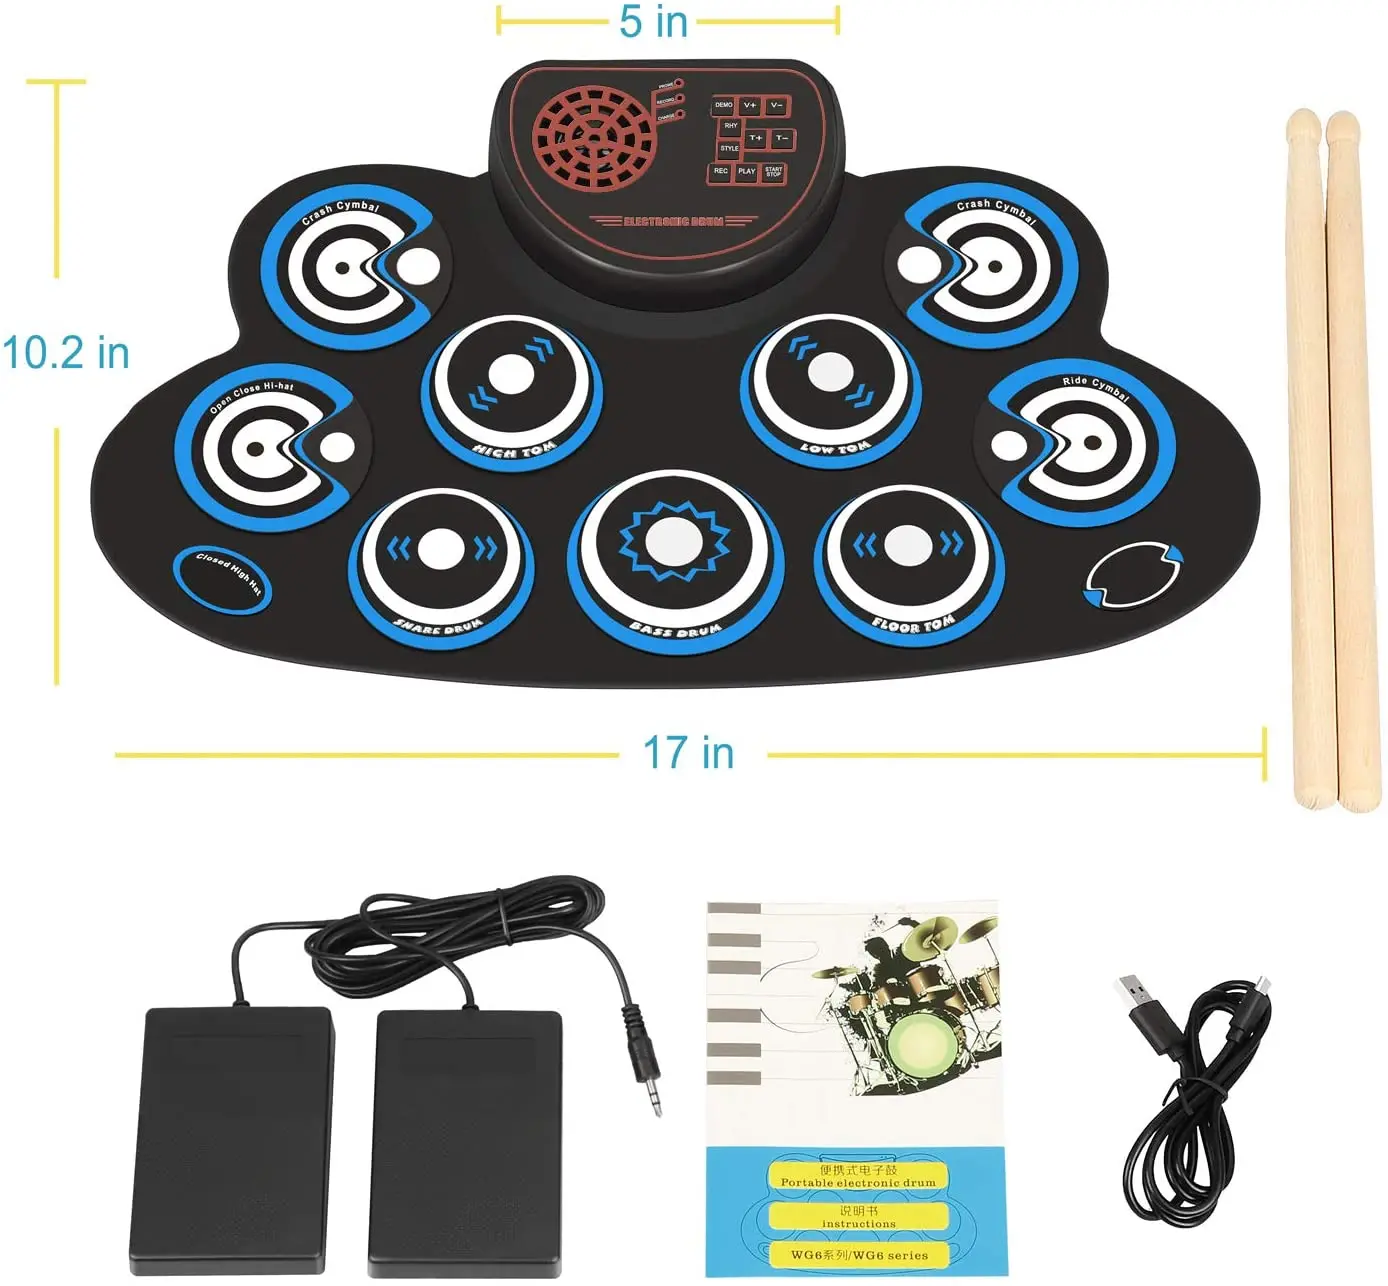 Compact Size USB Roll-Up Silicon Drum Set Digital Electronic Drum Sets Kit 9 Drum Pads with Drumsticks Foot Pedals enlarge